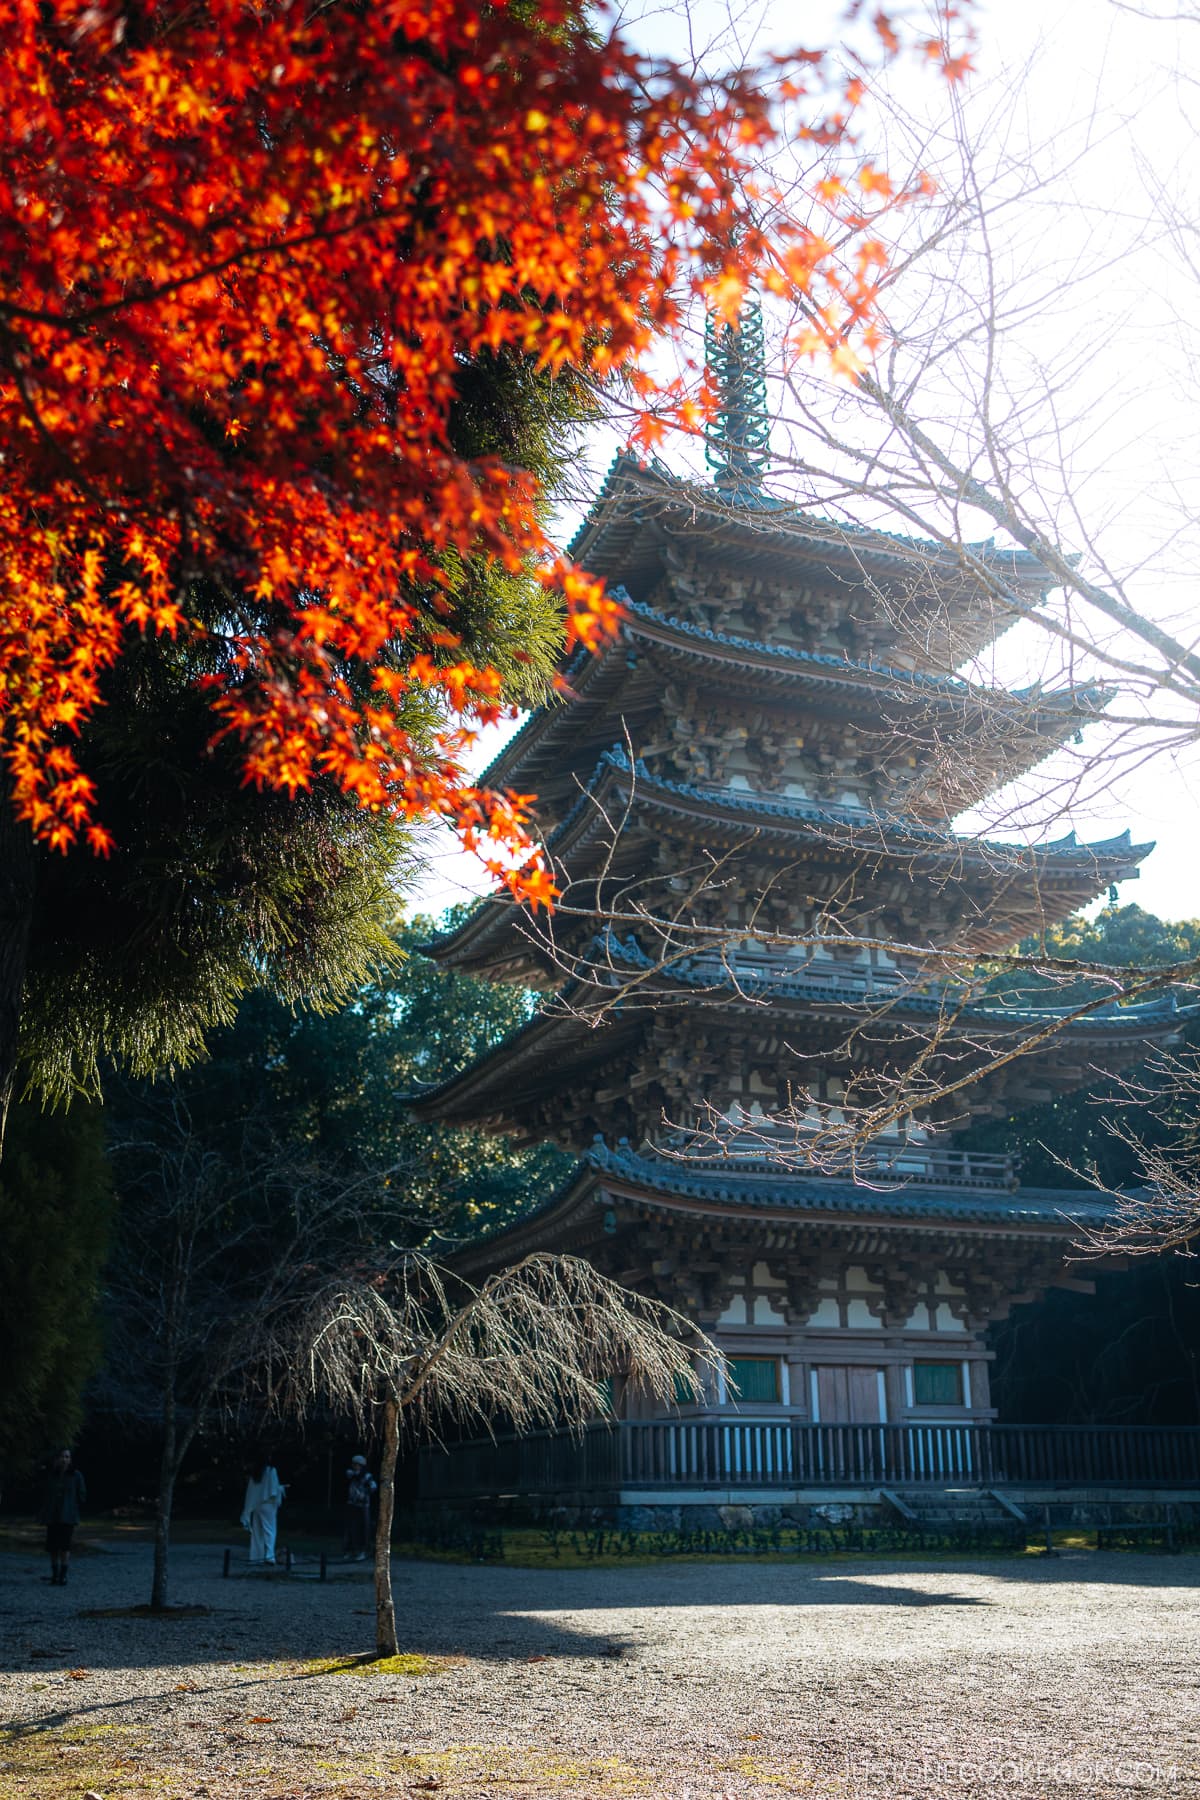 Five story pagoda next to autumn leaves